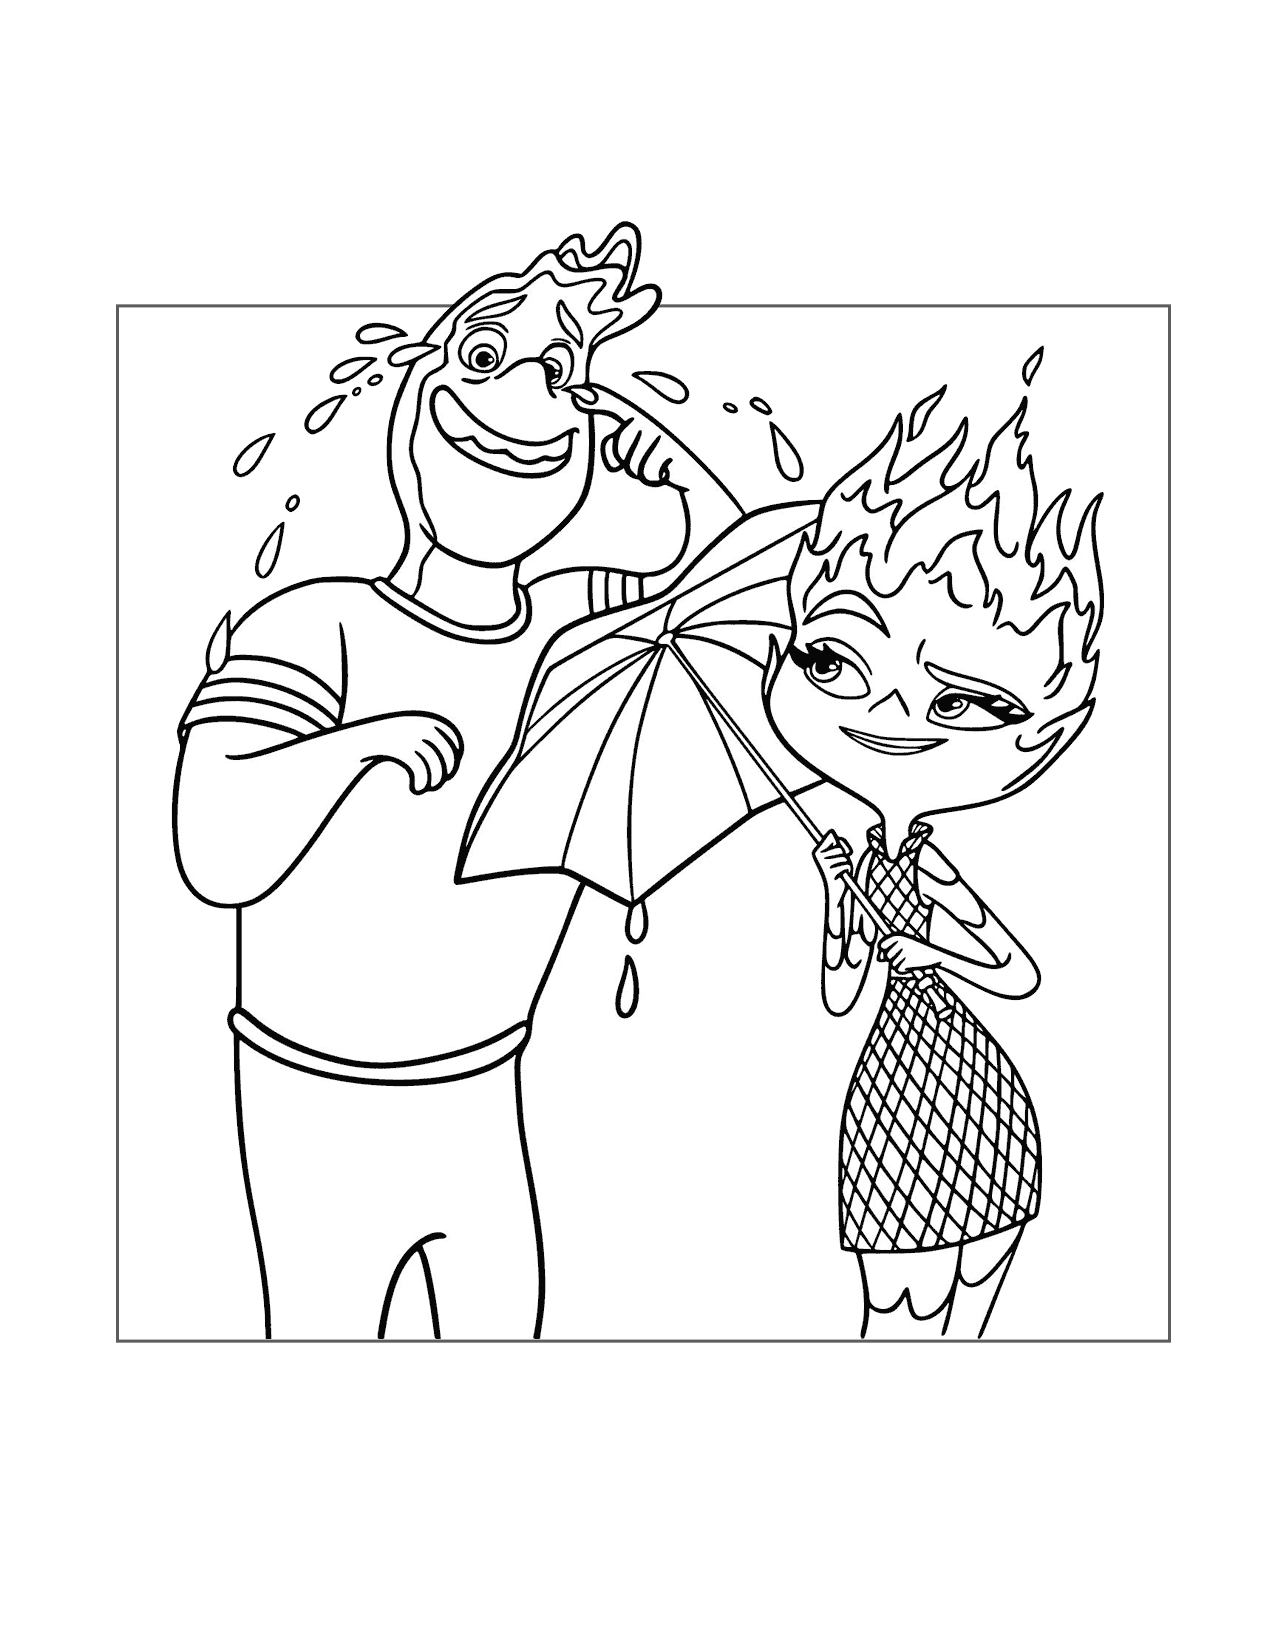 Ember Protects Herself From Wades Tears Coloring Page